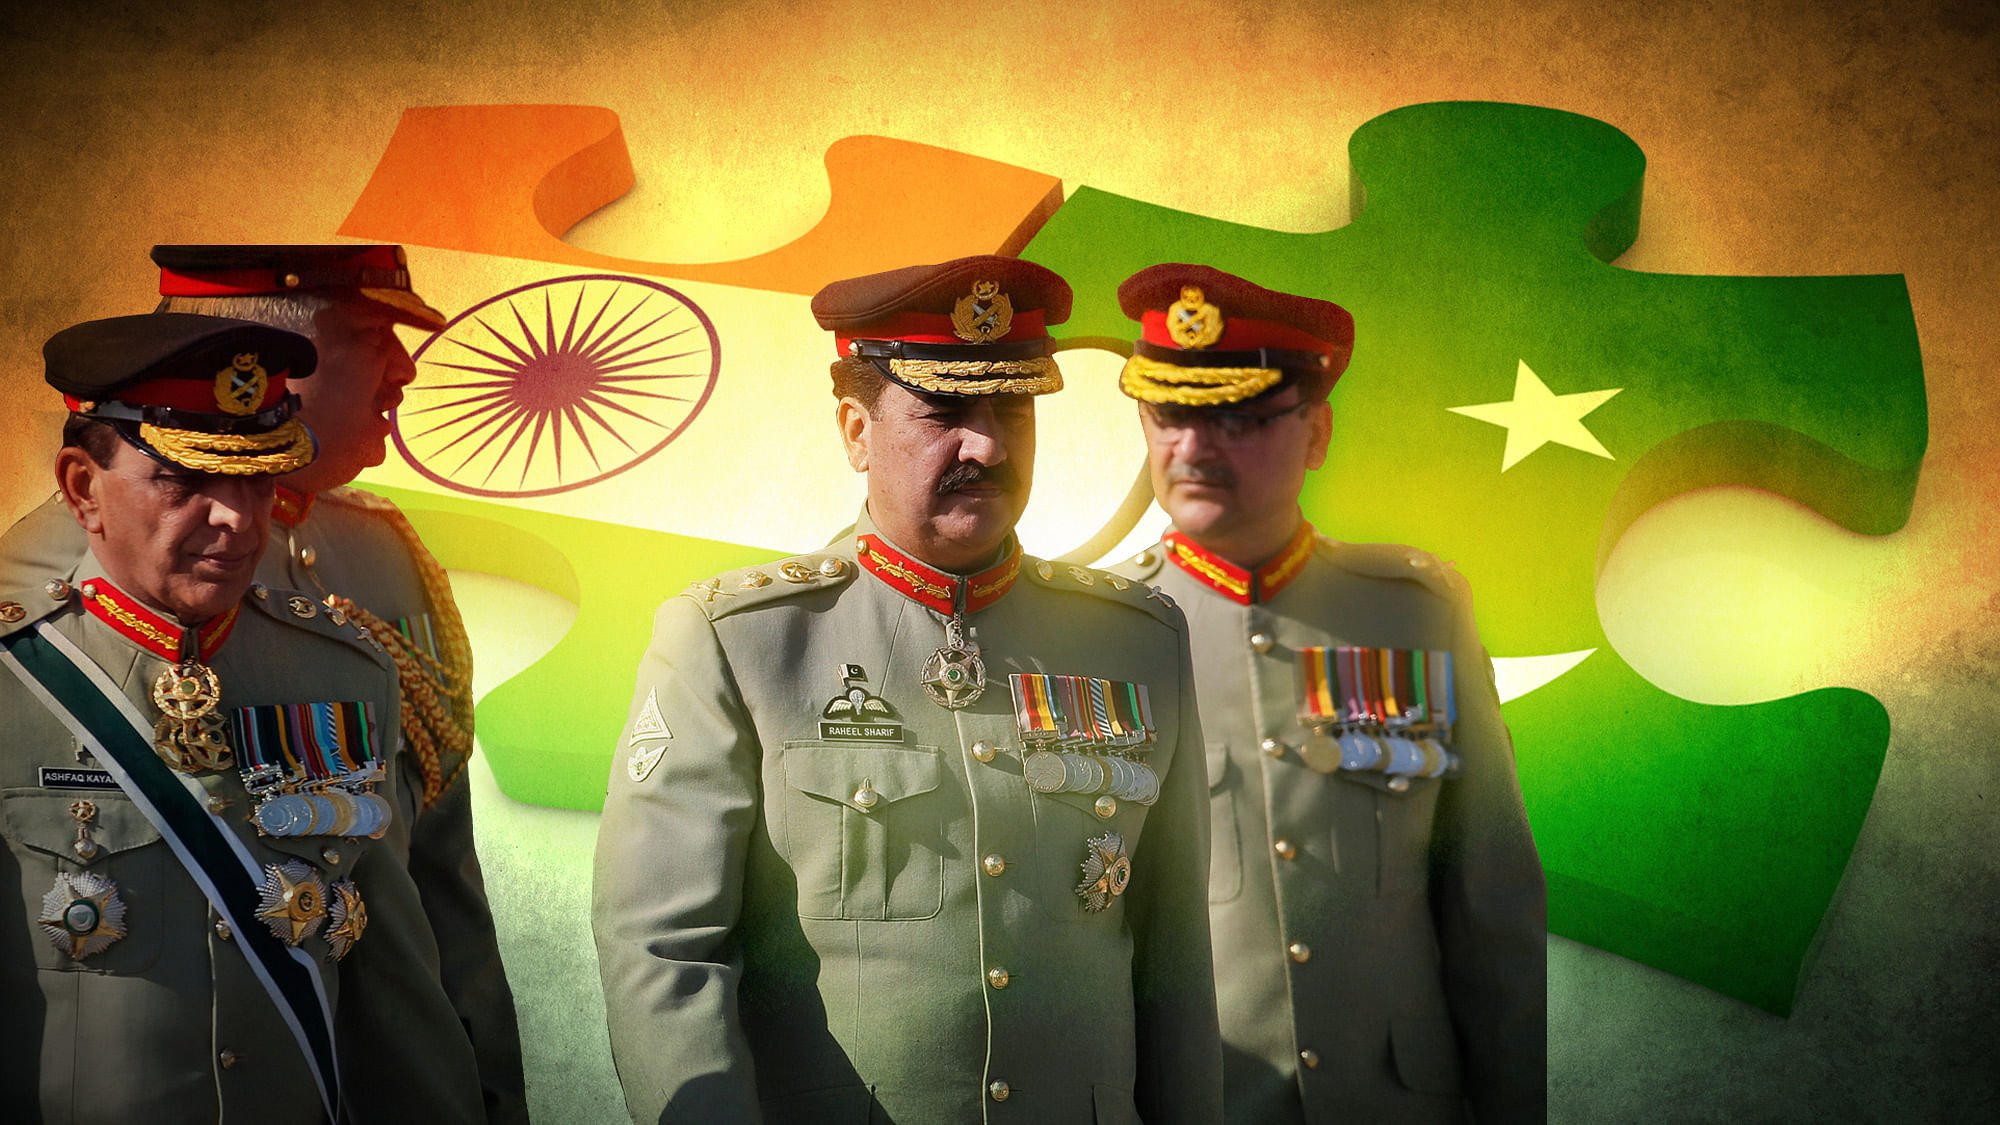 As long as the Pakistan Army continues to determine country’s foreign policy, how reasonable is it for India to adapt a passive approach towards Pakistan? (Photo: The Quint)